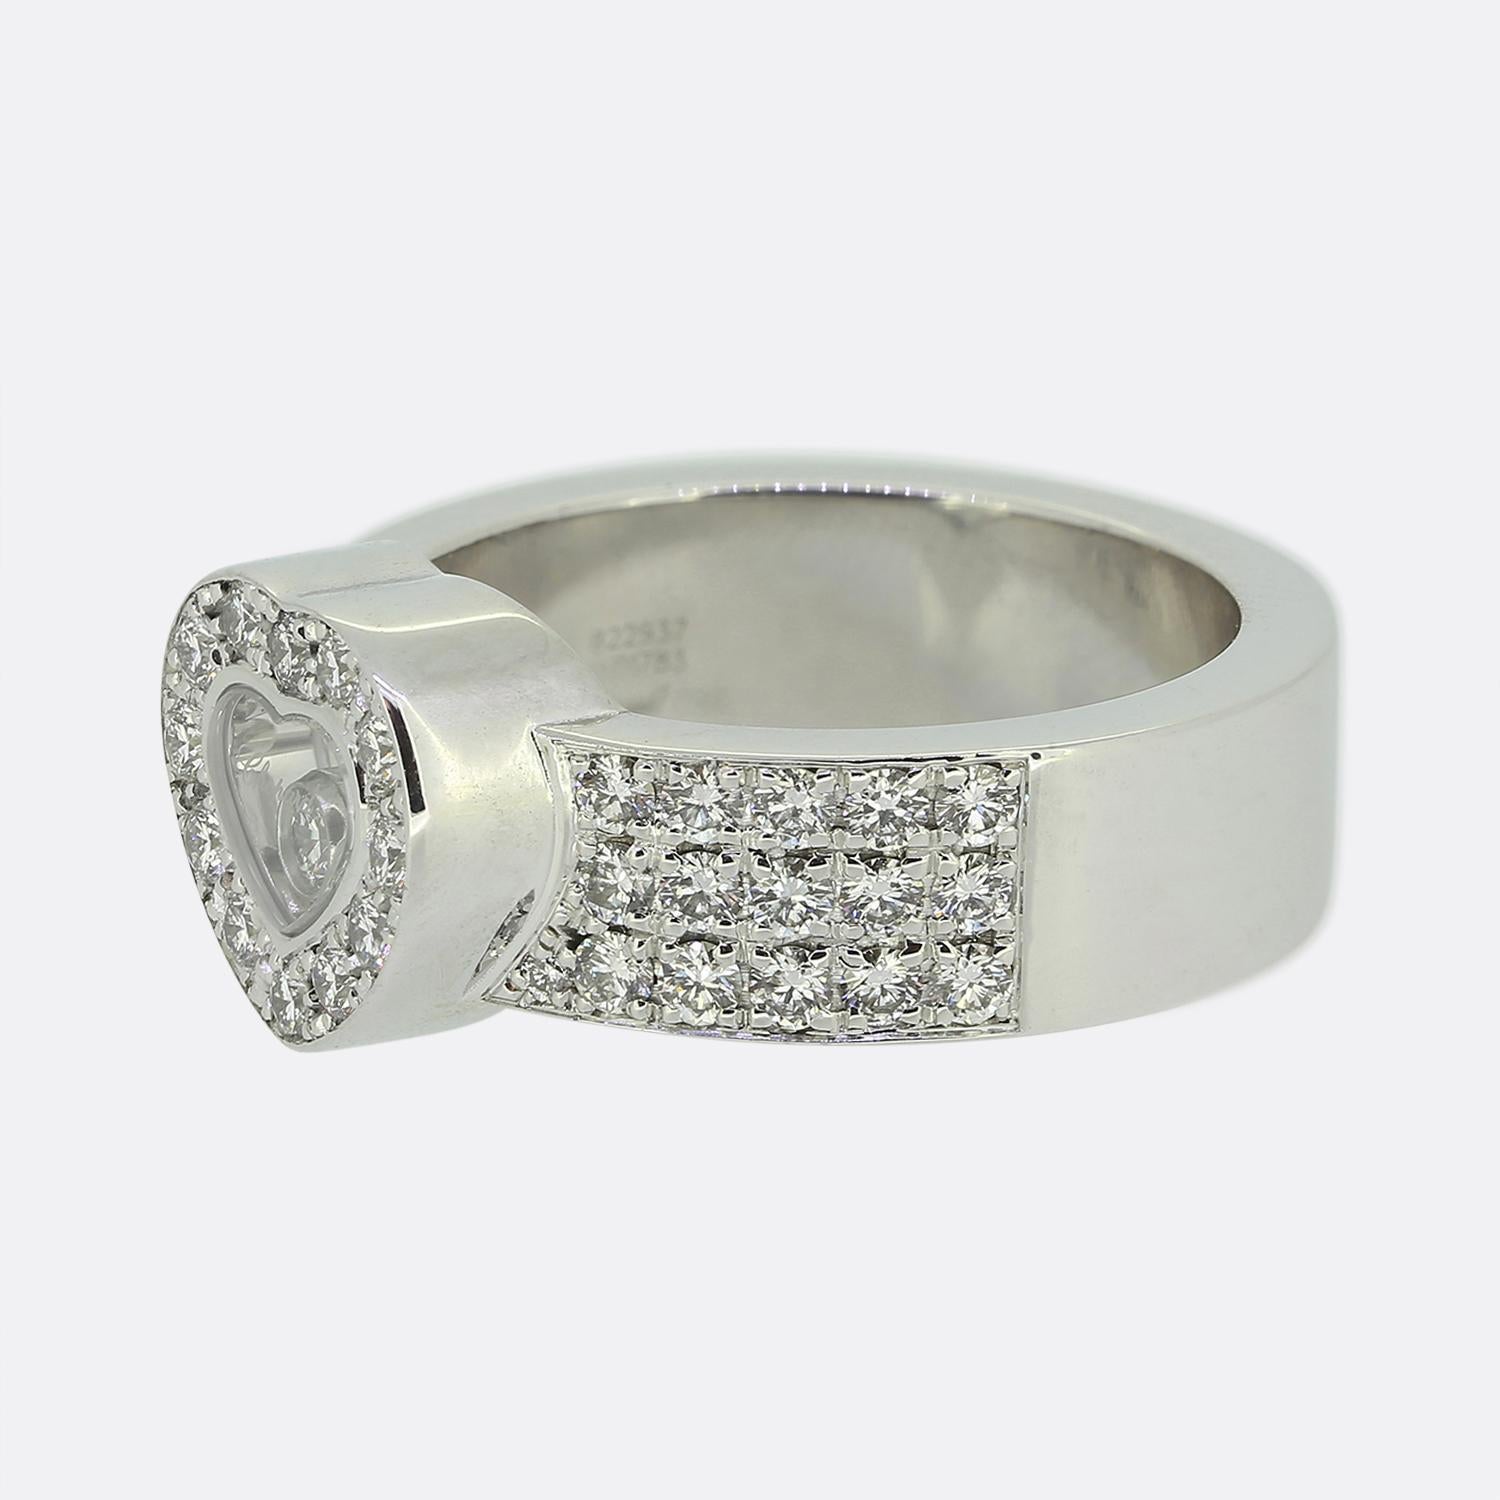 Here we have a dazzling diamond ring from the world renowned French jewellery designer Chopard. This piece has been crafted from 18ct white gold and forms part of their iconic Happy Diamonds collection. The face takes on a love heart design with